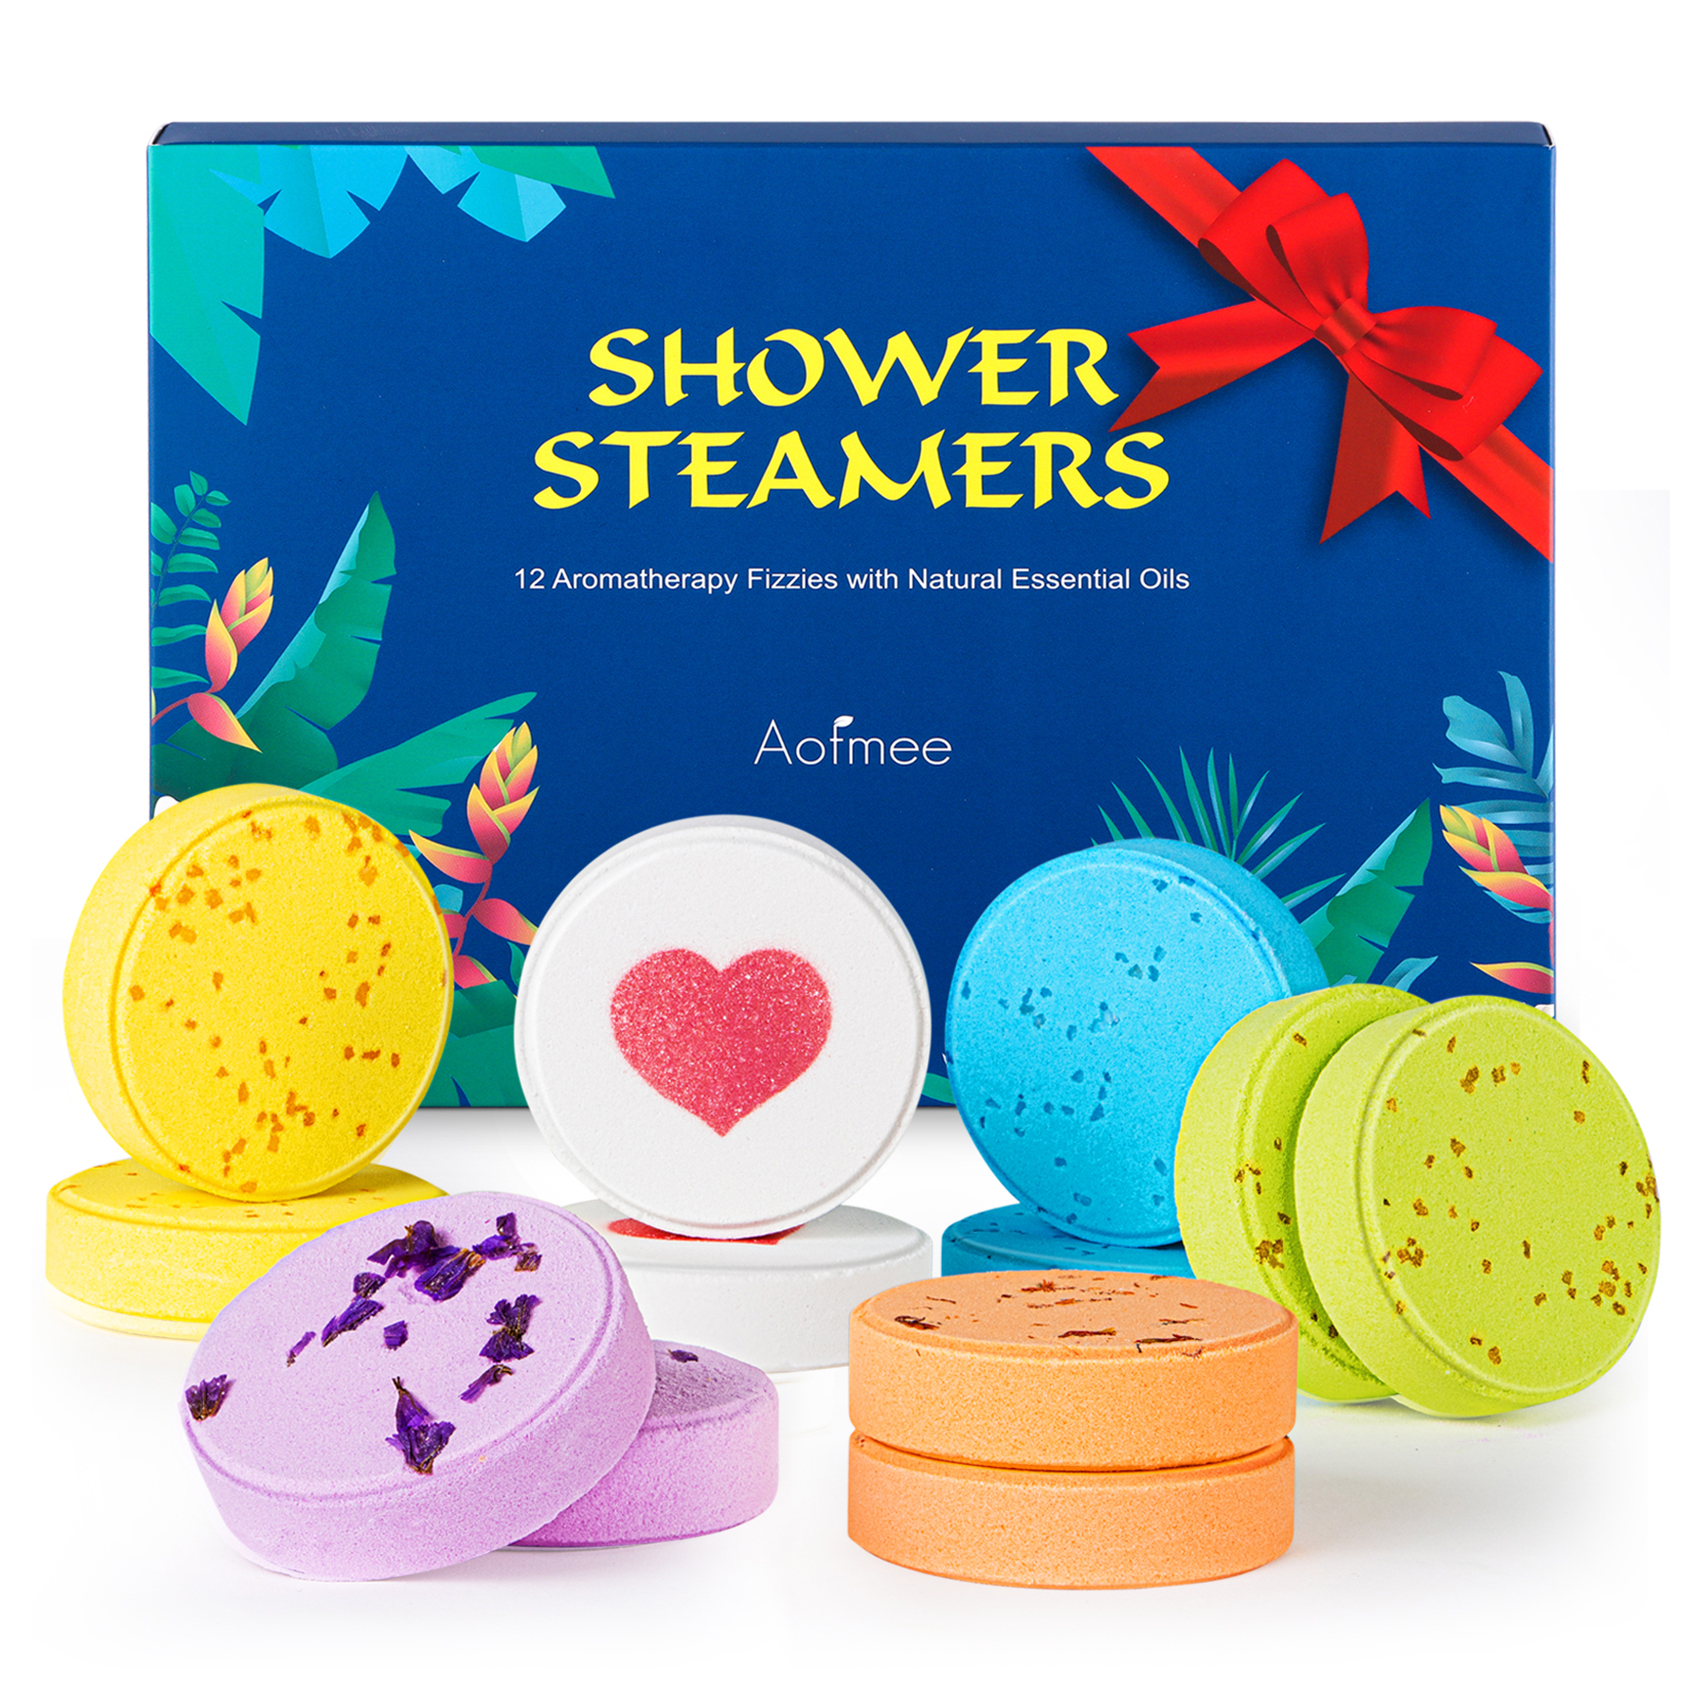  Aromatherapy Shower Steamers Gifts for Mom - Swcandy 8